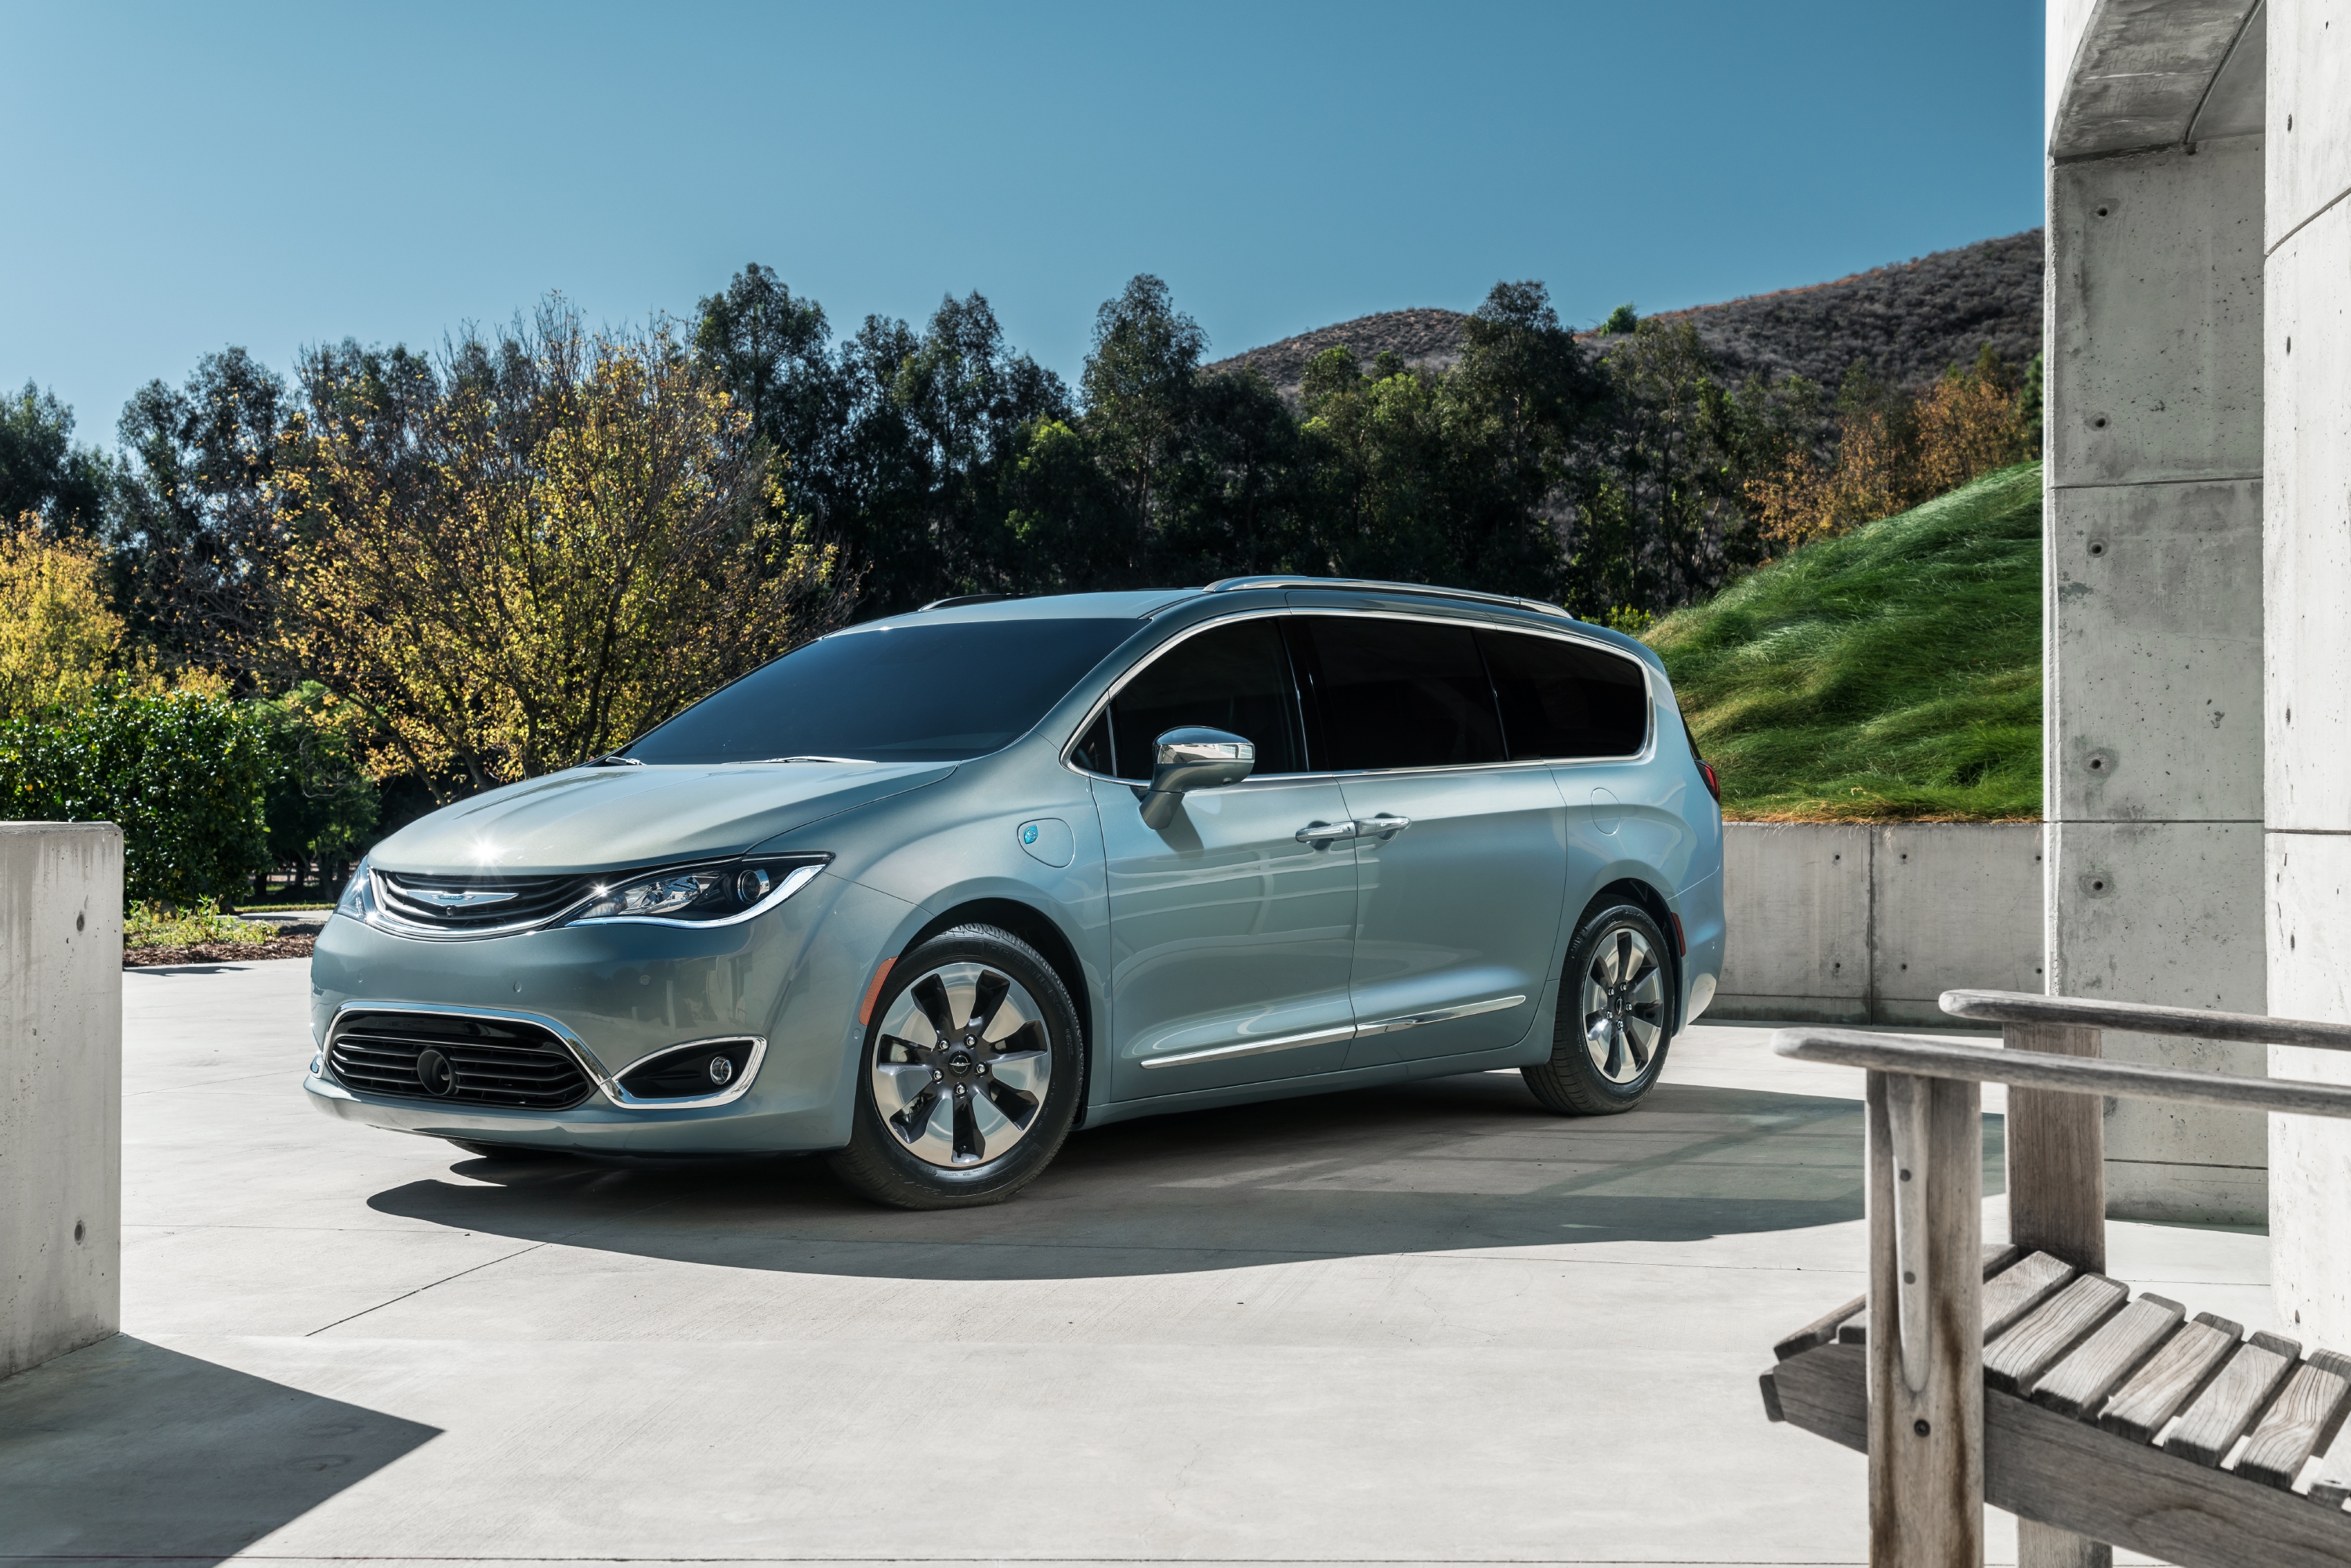 2017 Chrysler Pacifica earns IIHS Top Safety Pick+